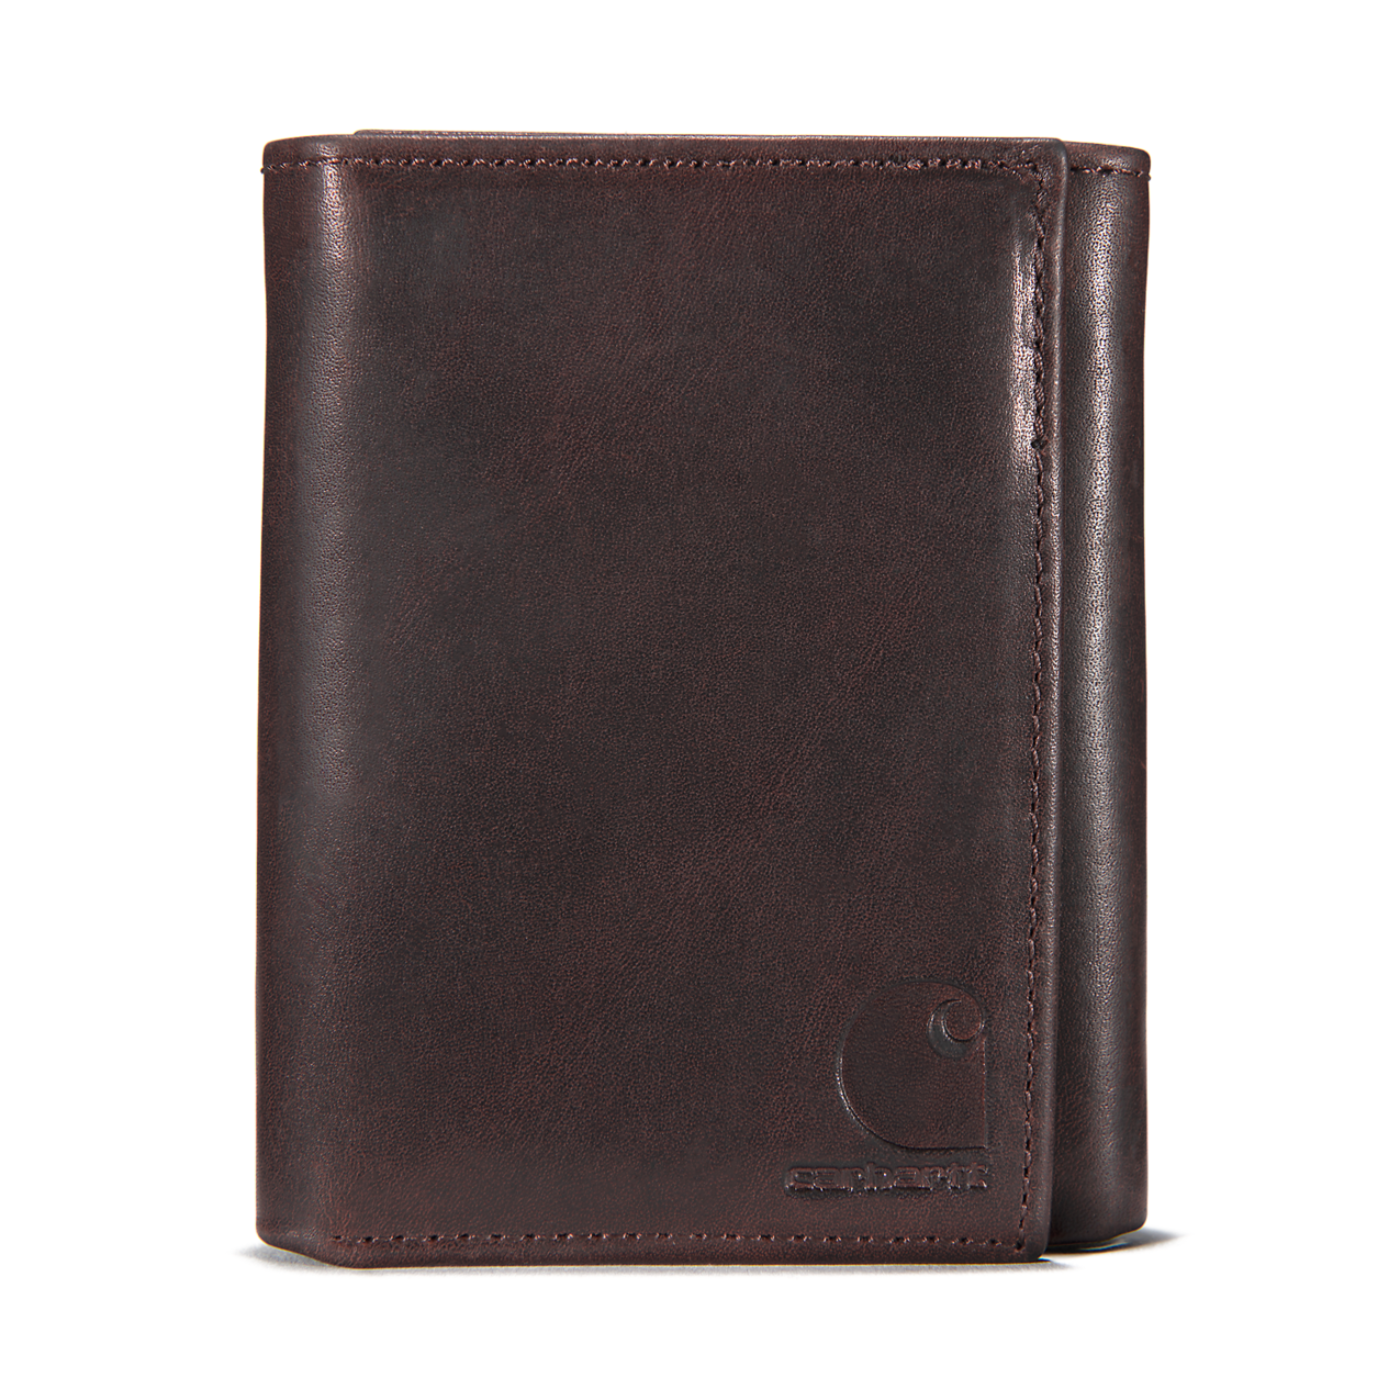 Carhartt Trifold Leather Wallet